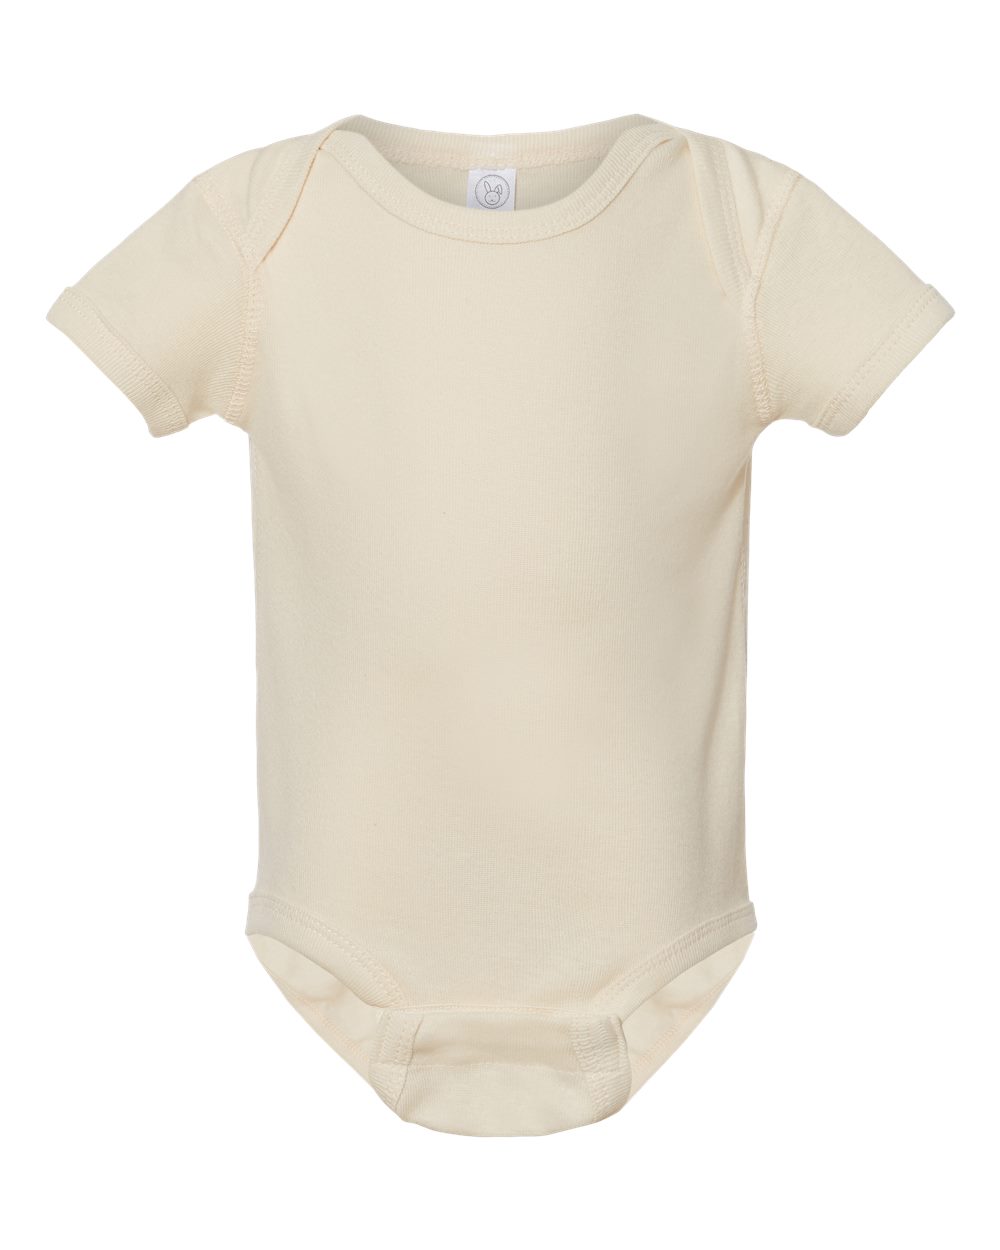 Infant - iRealty Distressed Logo One Piece